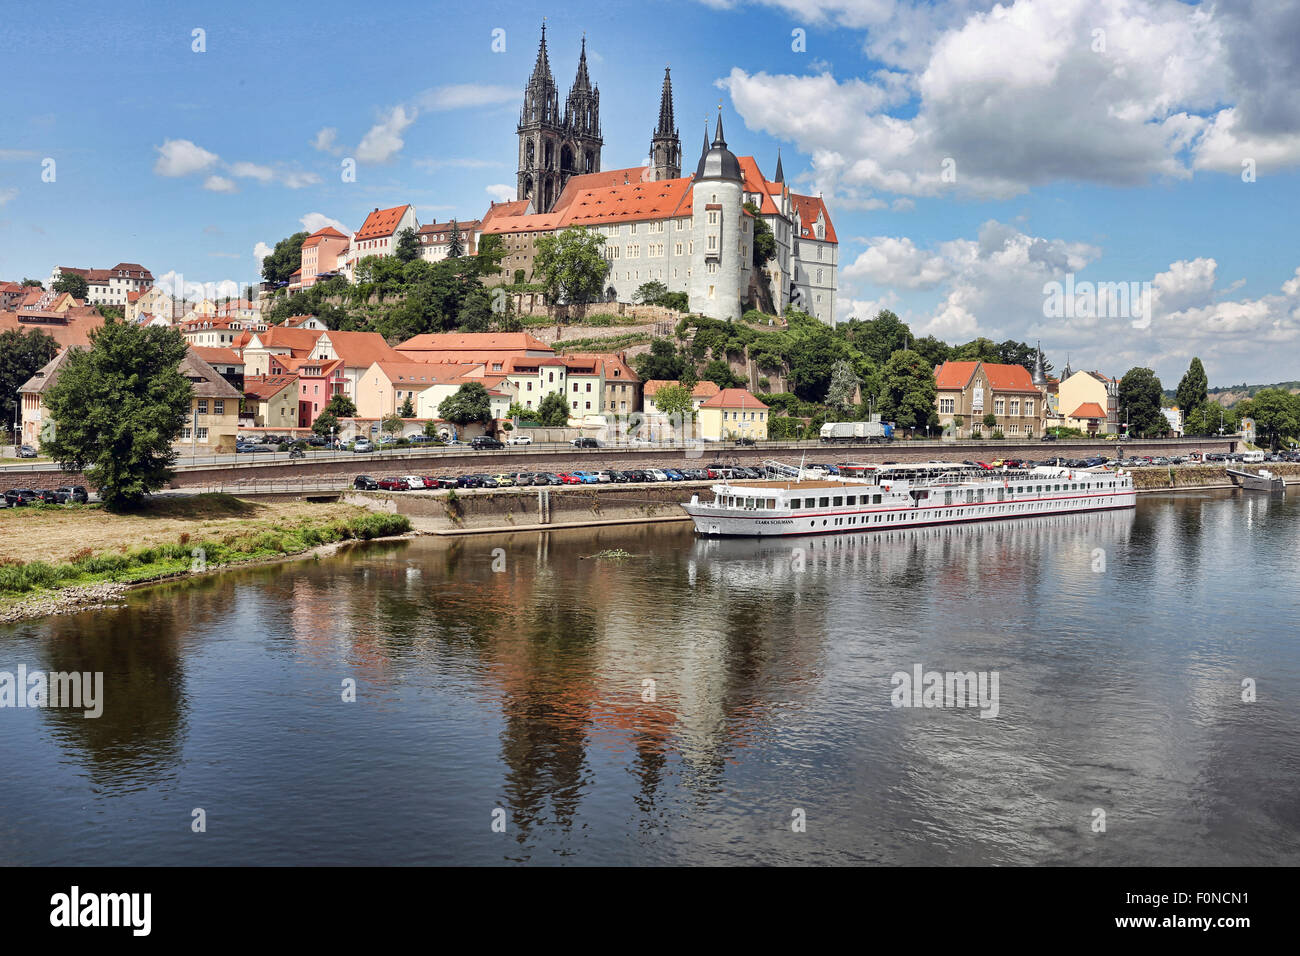 Castle hill with Albrechtsburg and Cathedral reflected in the water of the Elbe, Meissen district, Saxony, Germany Stock Photo